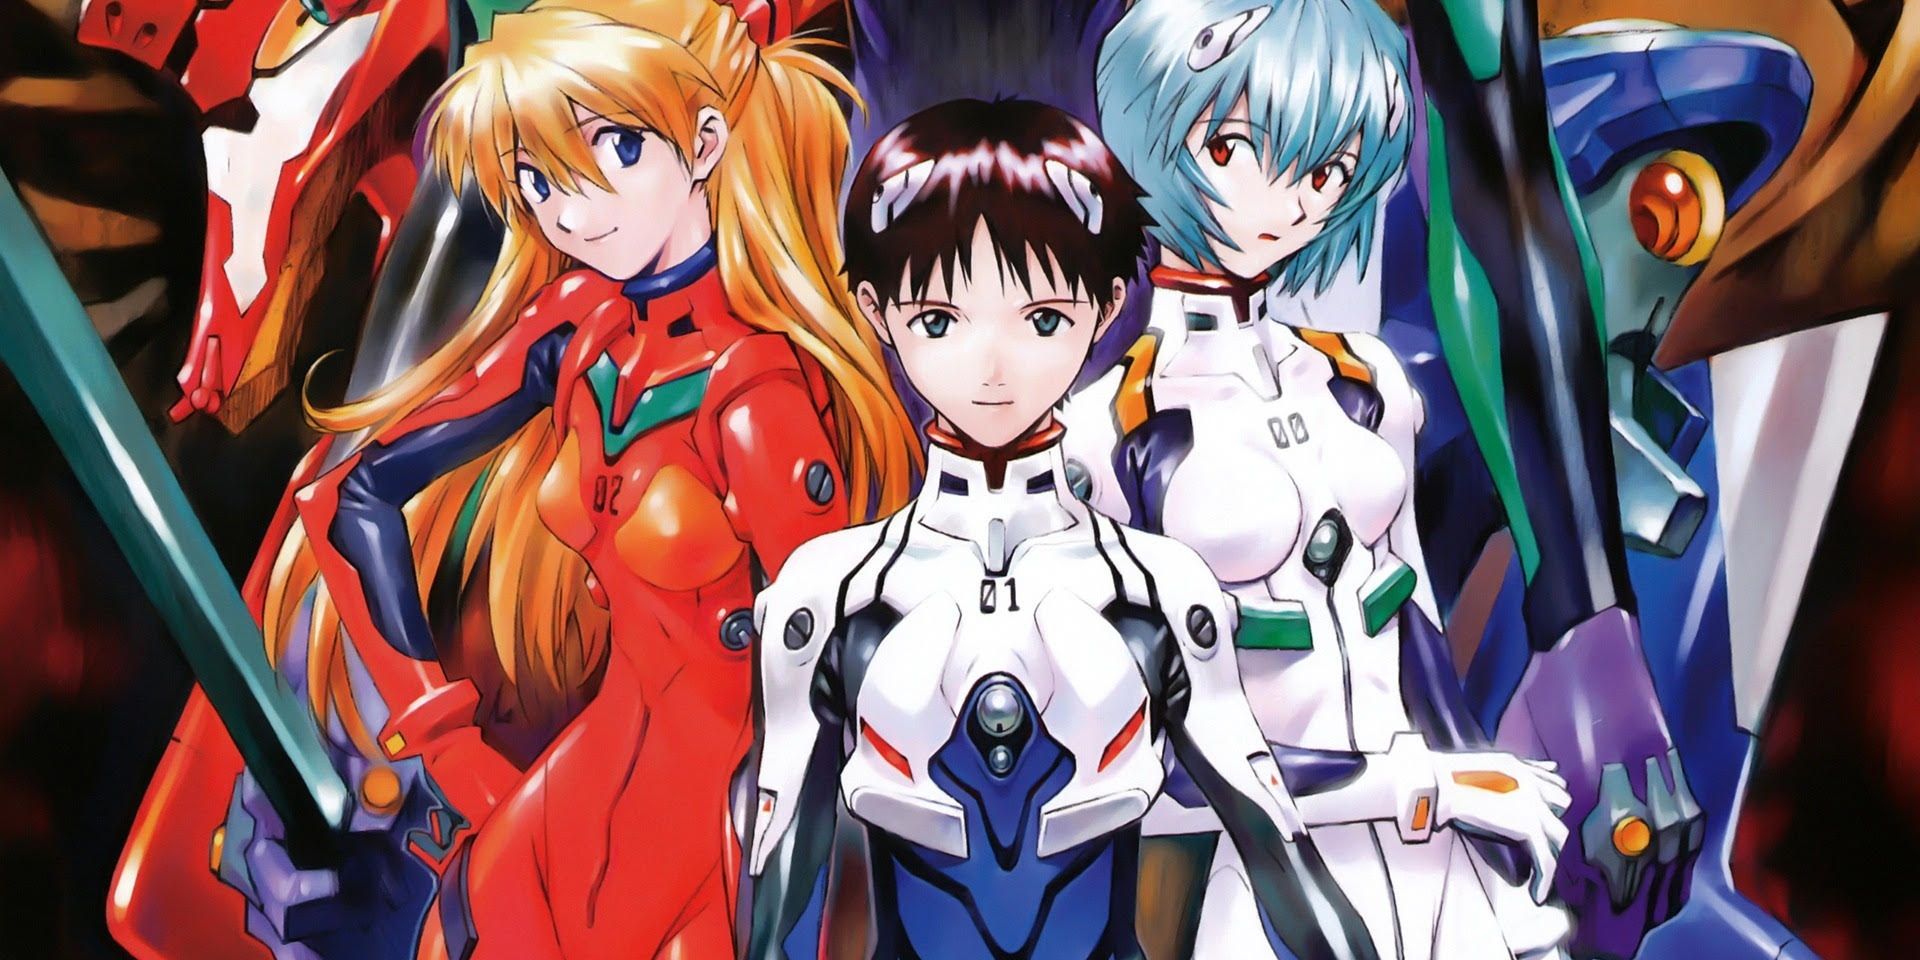 Discover the captivating world of Neon Genesis Evangelion with Shinji